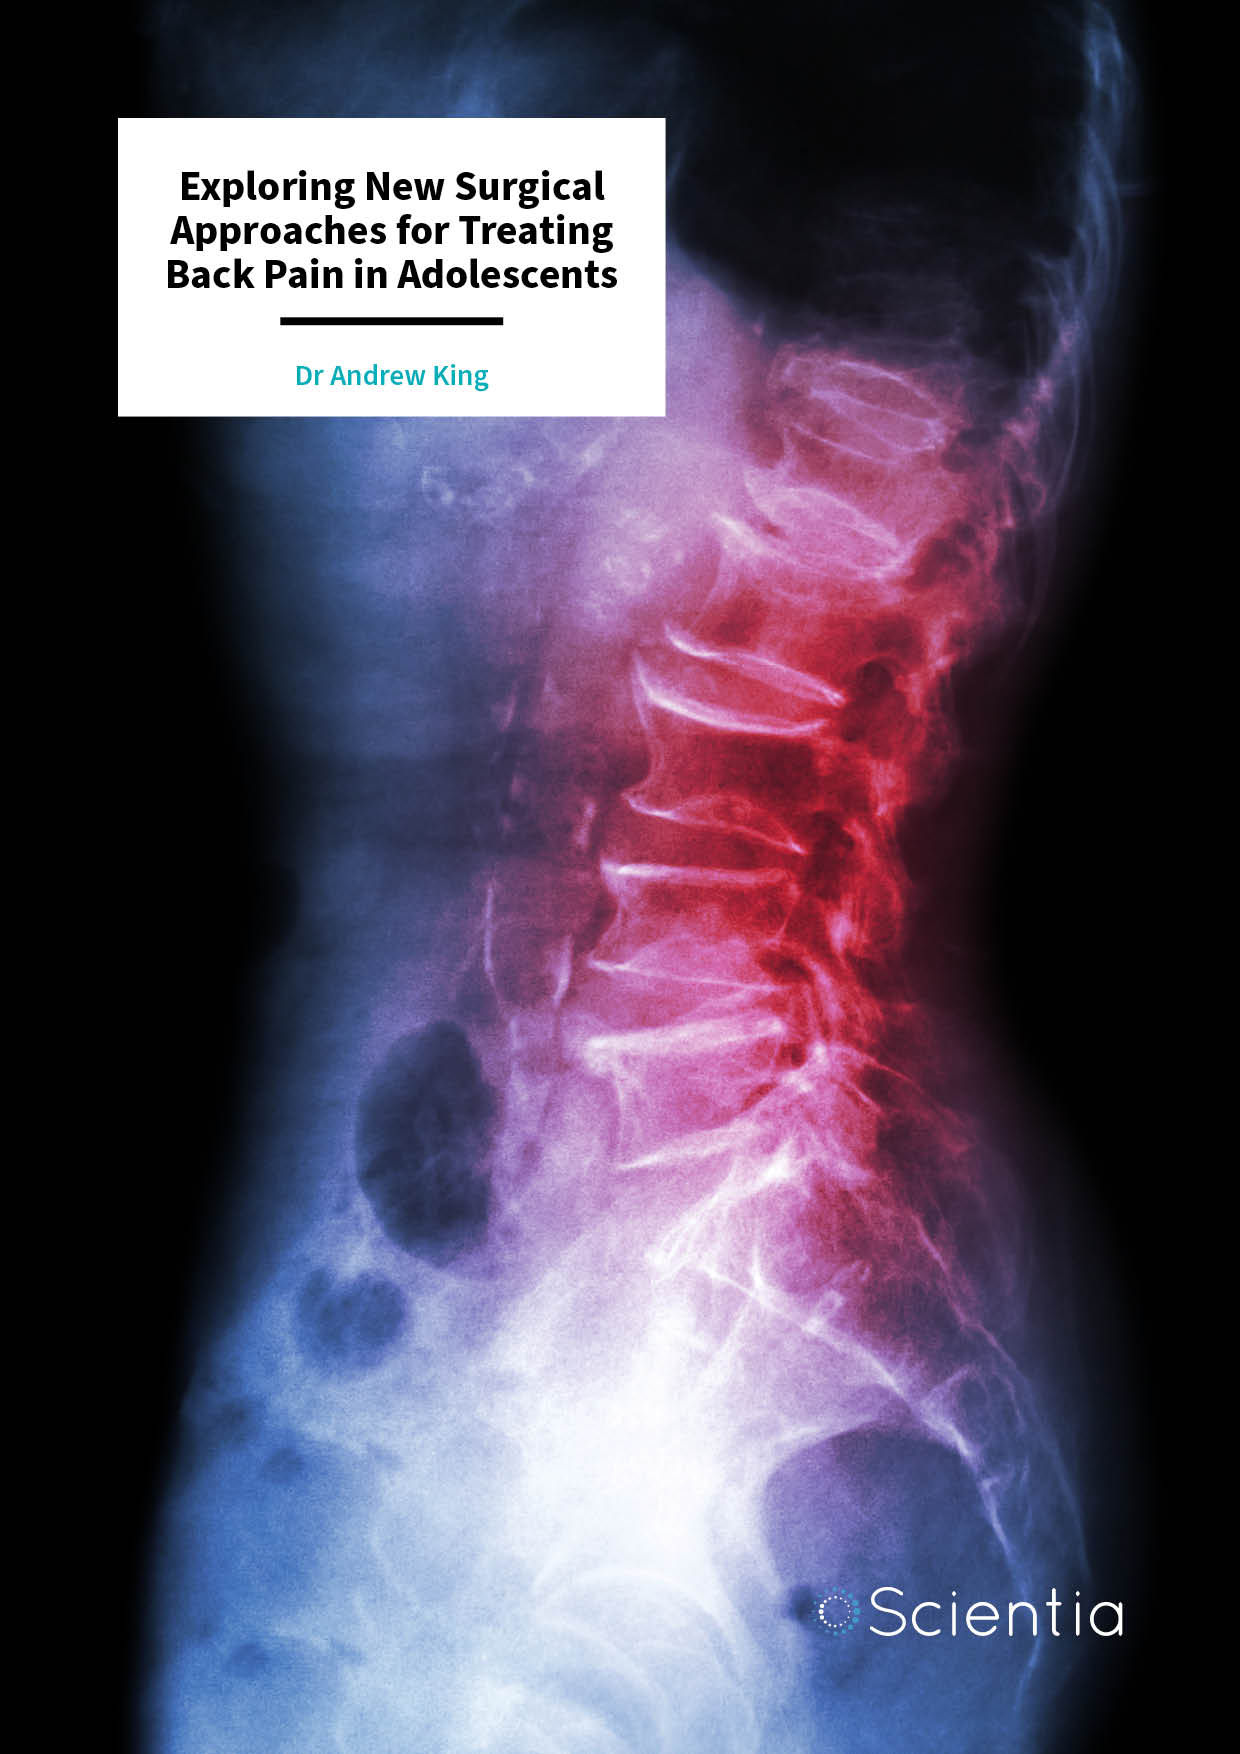 Dr Andrew King | Exploring New Surgical Approaches For Treating Back Pain In Adolescents